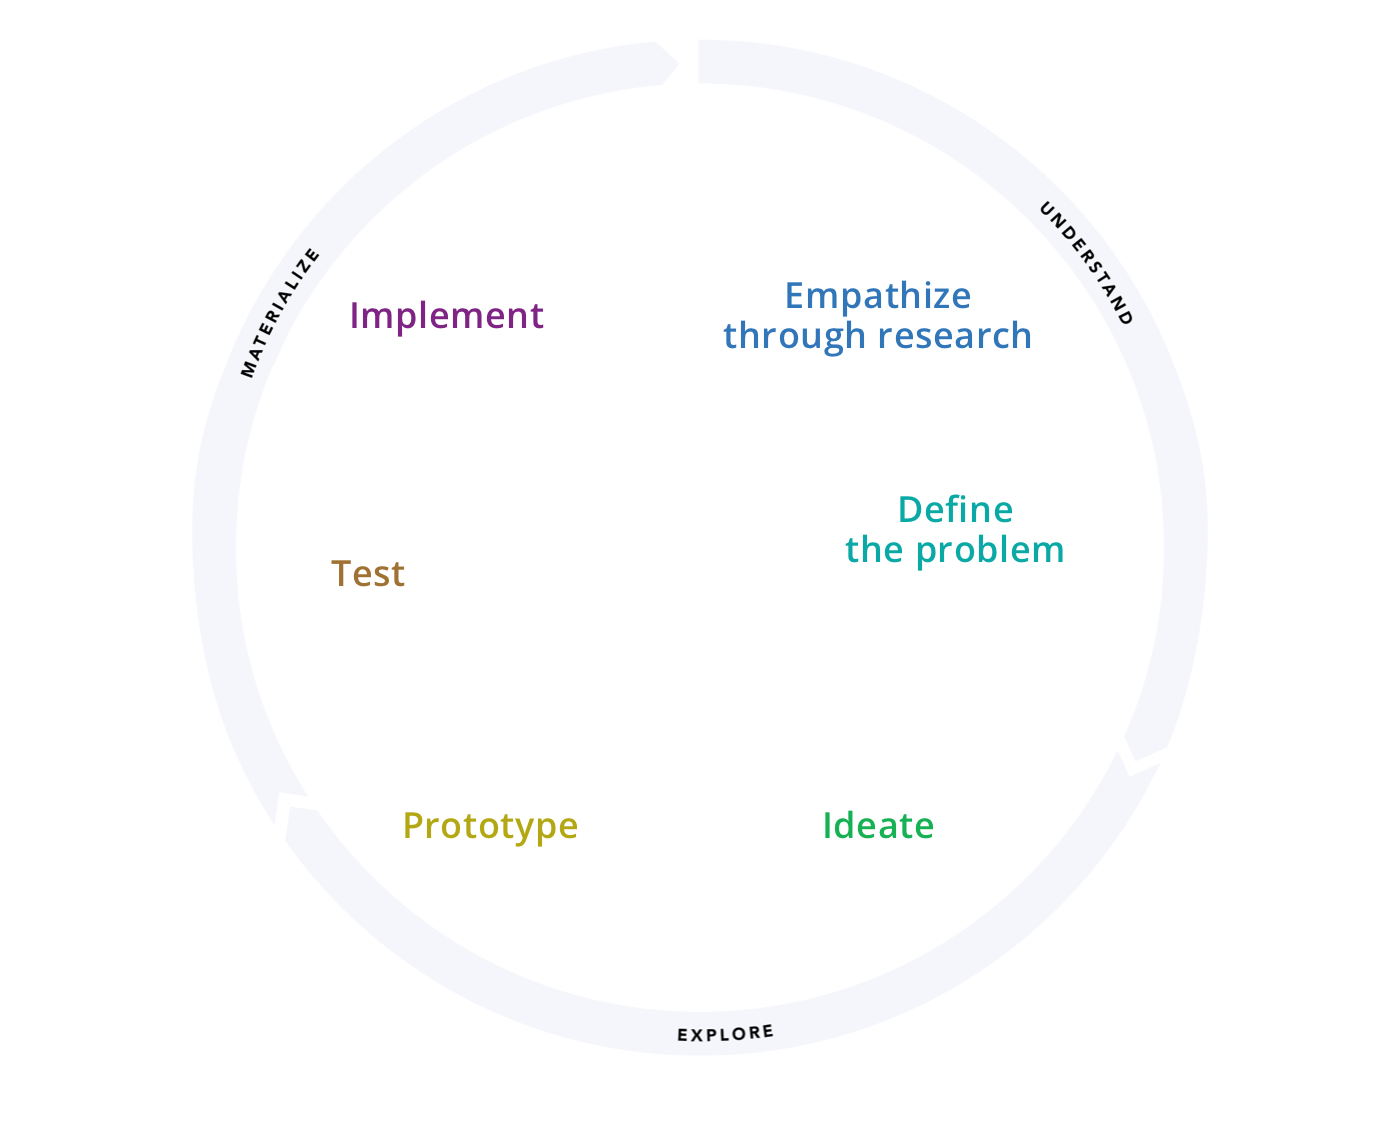 Six stages of the design process: Empathize, Define, Ideate, Prototype, Test, Implement.